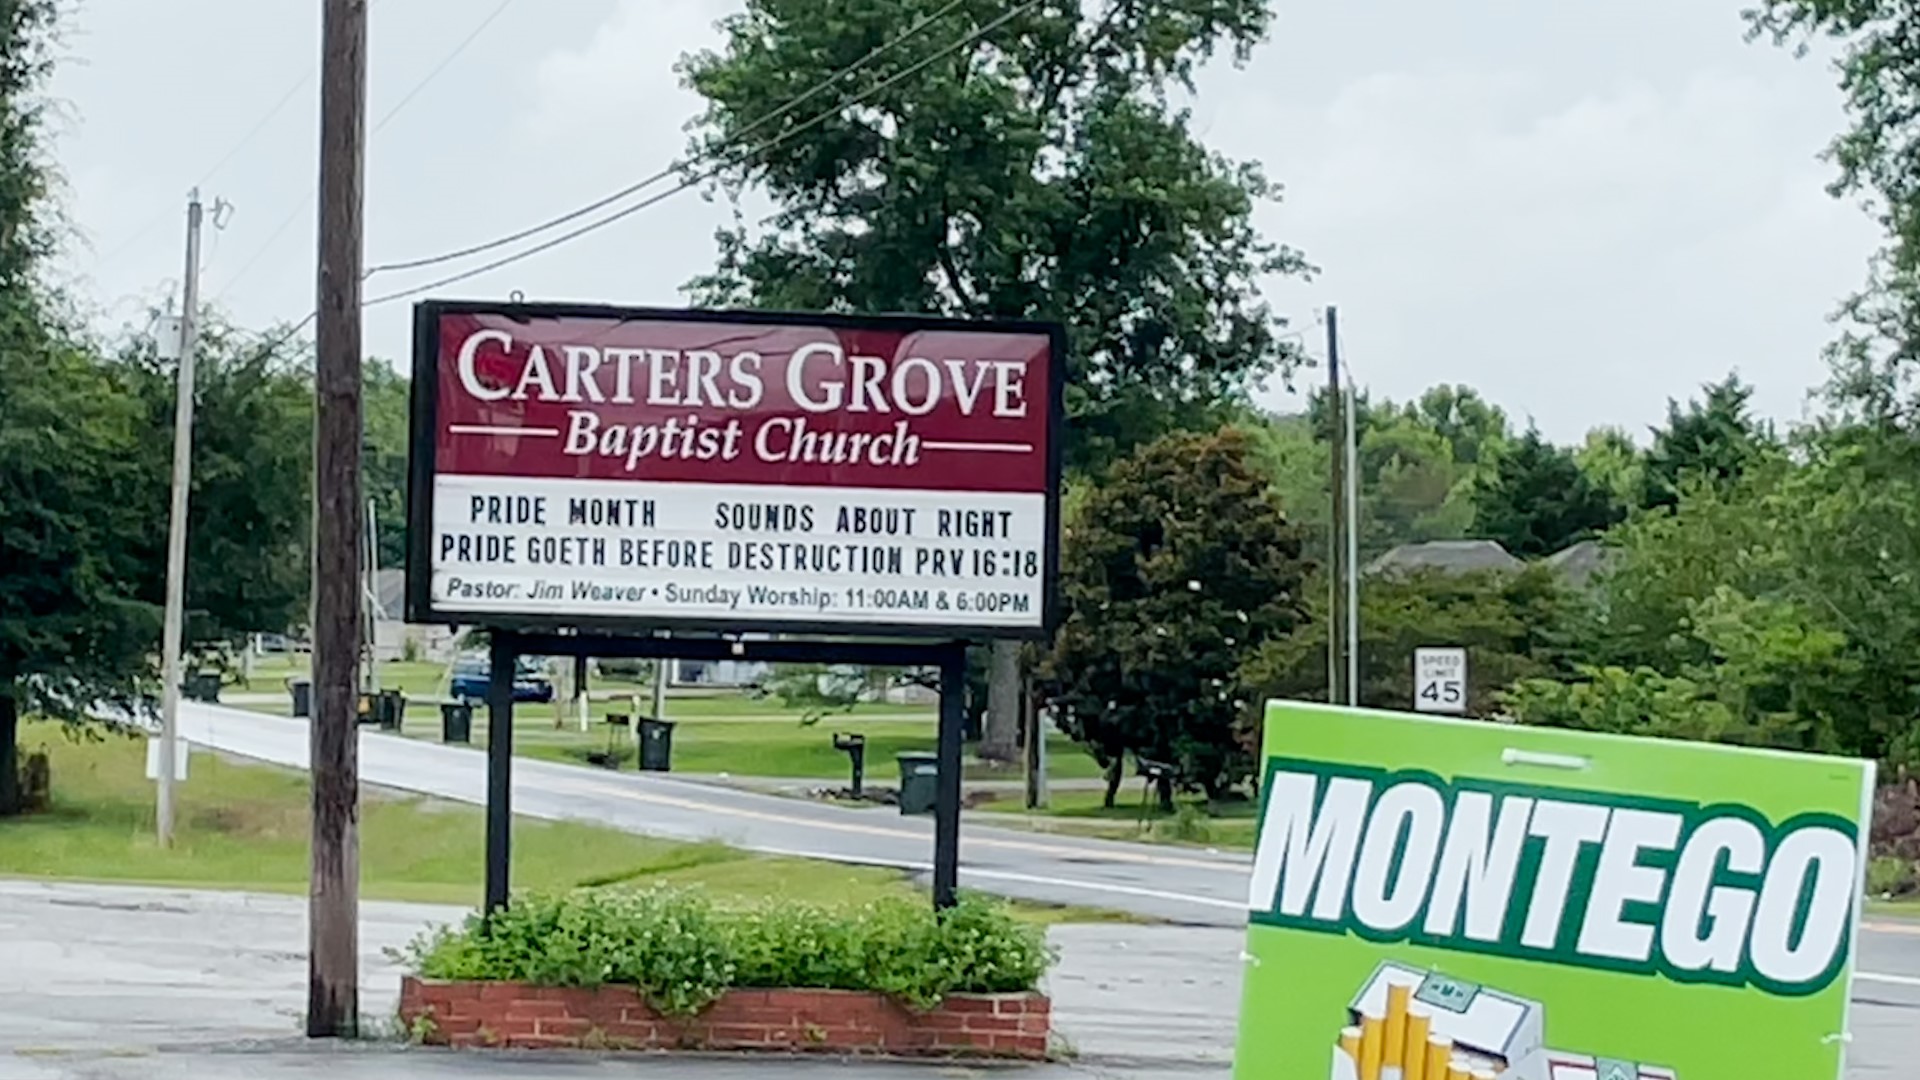 A Reddit user made a post in the /r/HuntsvilleAlabama subreddit about the message on the welcome sign of Carters Grove Baptist Church in Hazel Green.